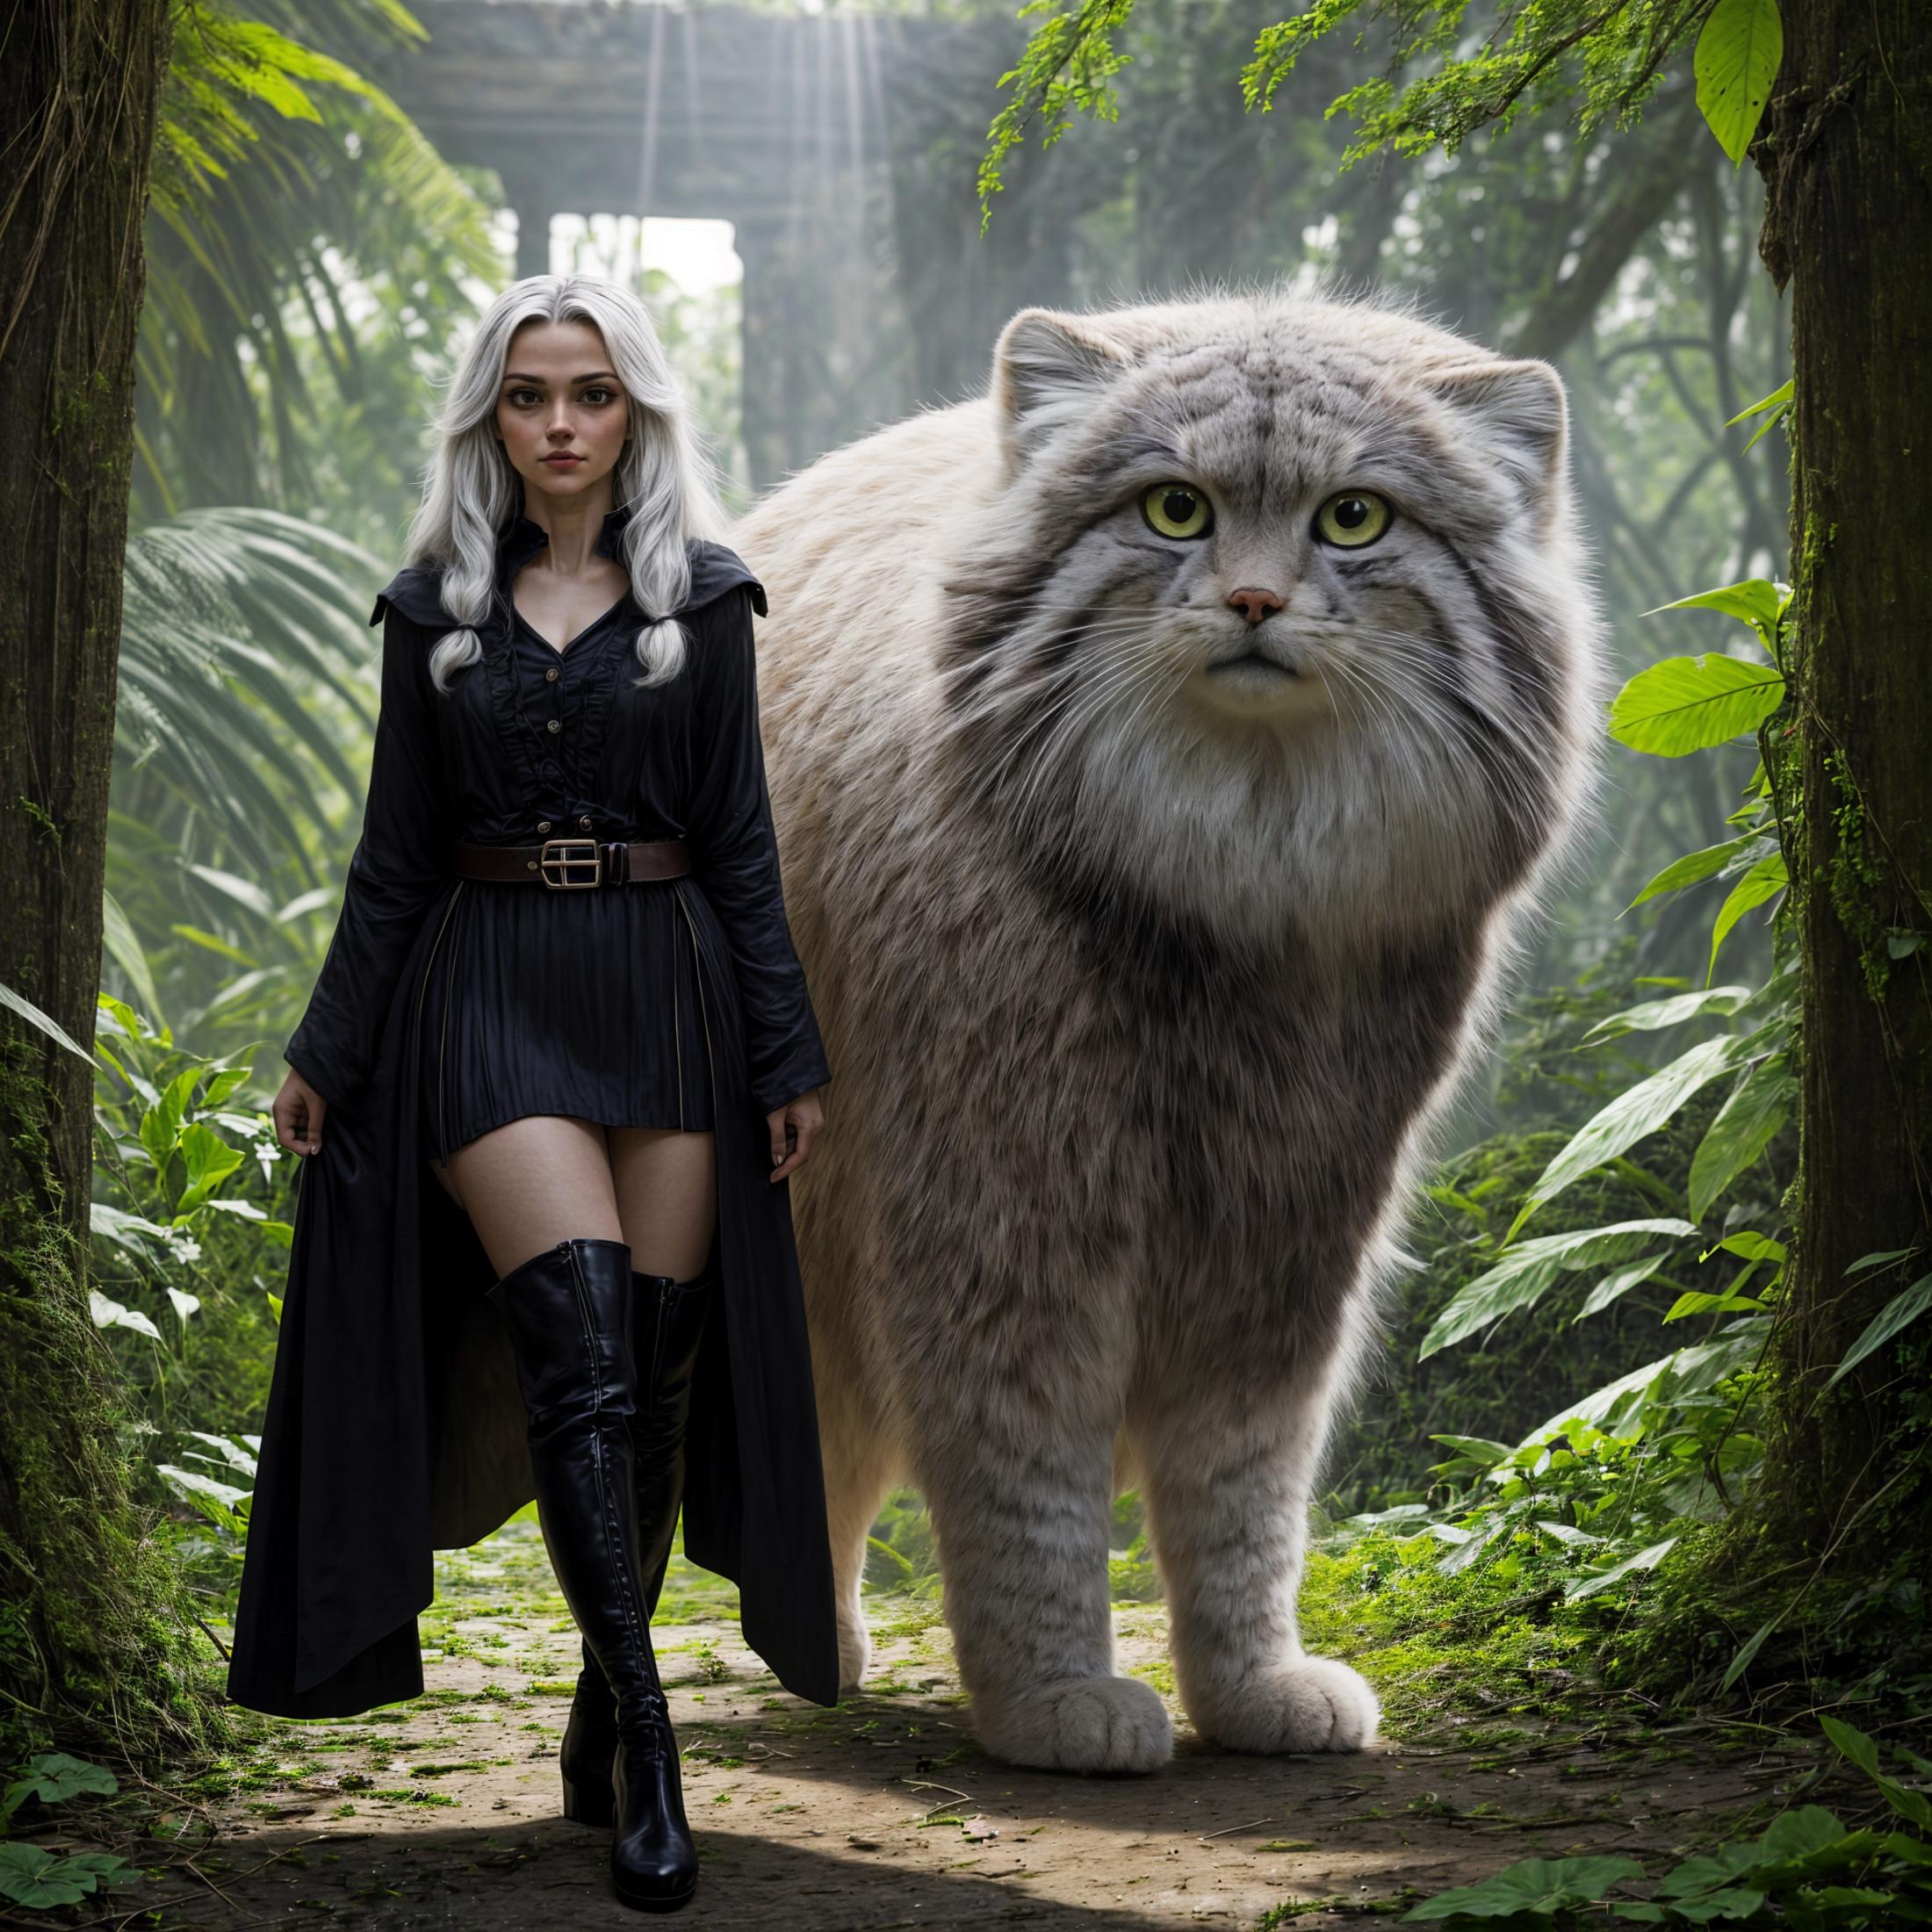 A woman with a black dress and black boots is walking through the forest with a giant cat.